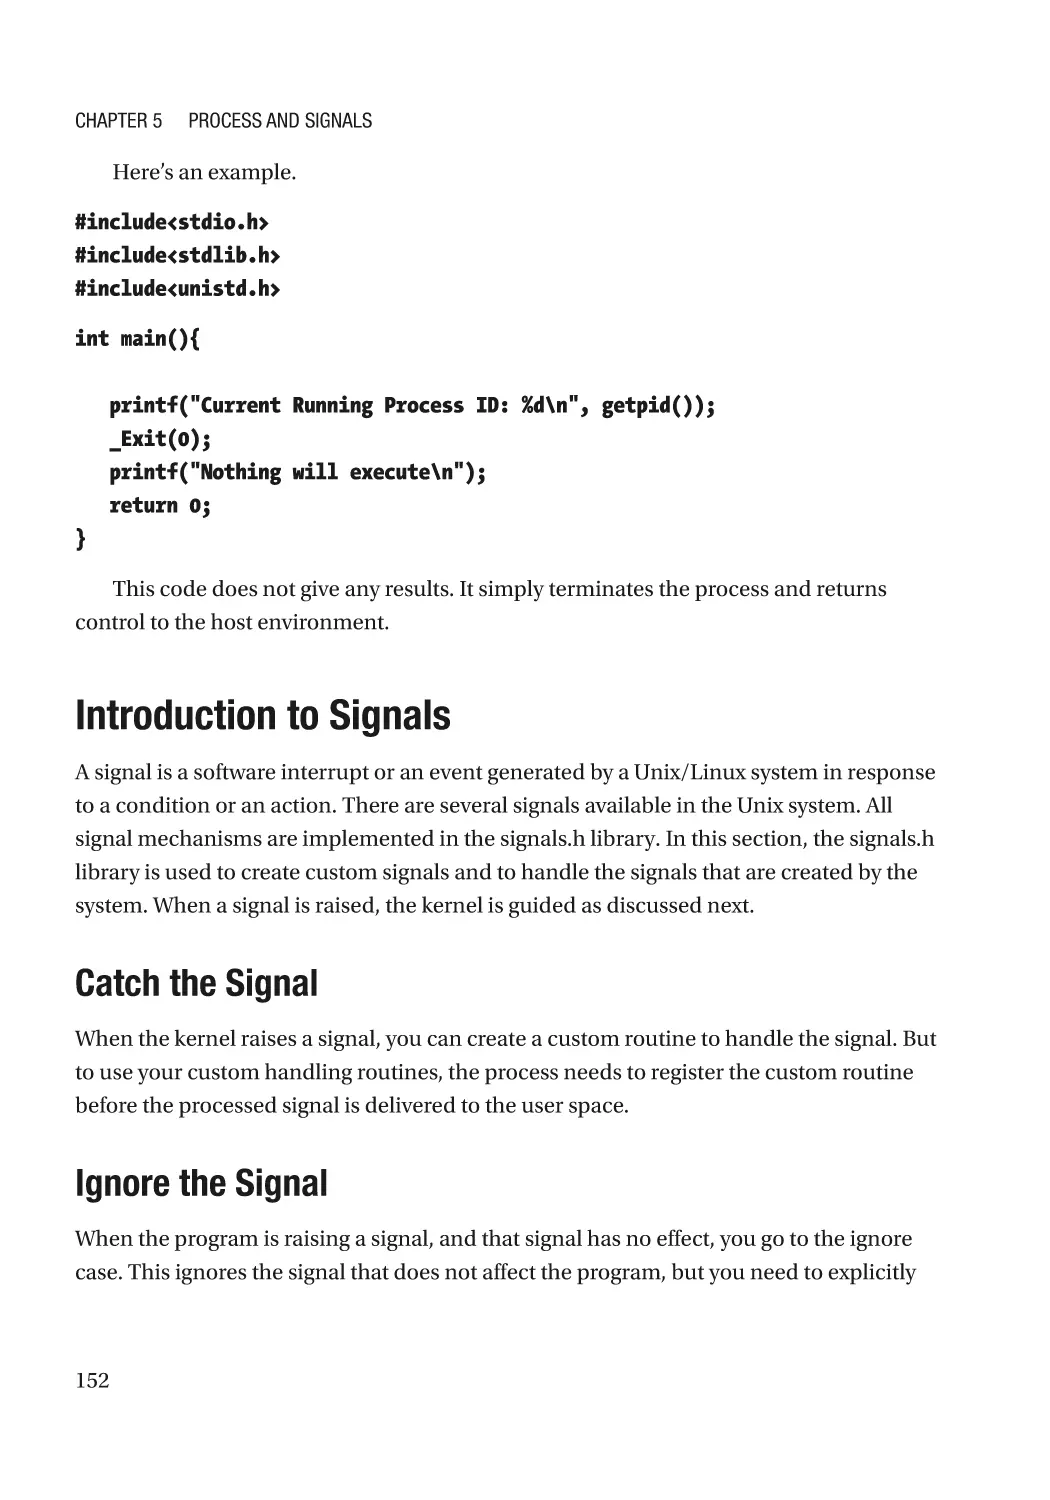 Introduction to Signals
Catch the Signal
Ignore the Signal